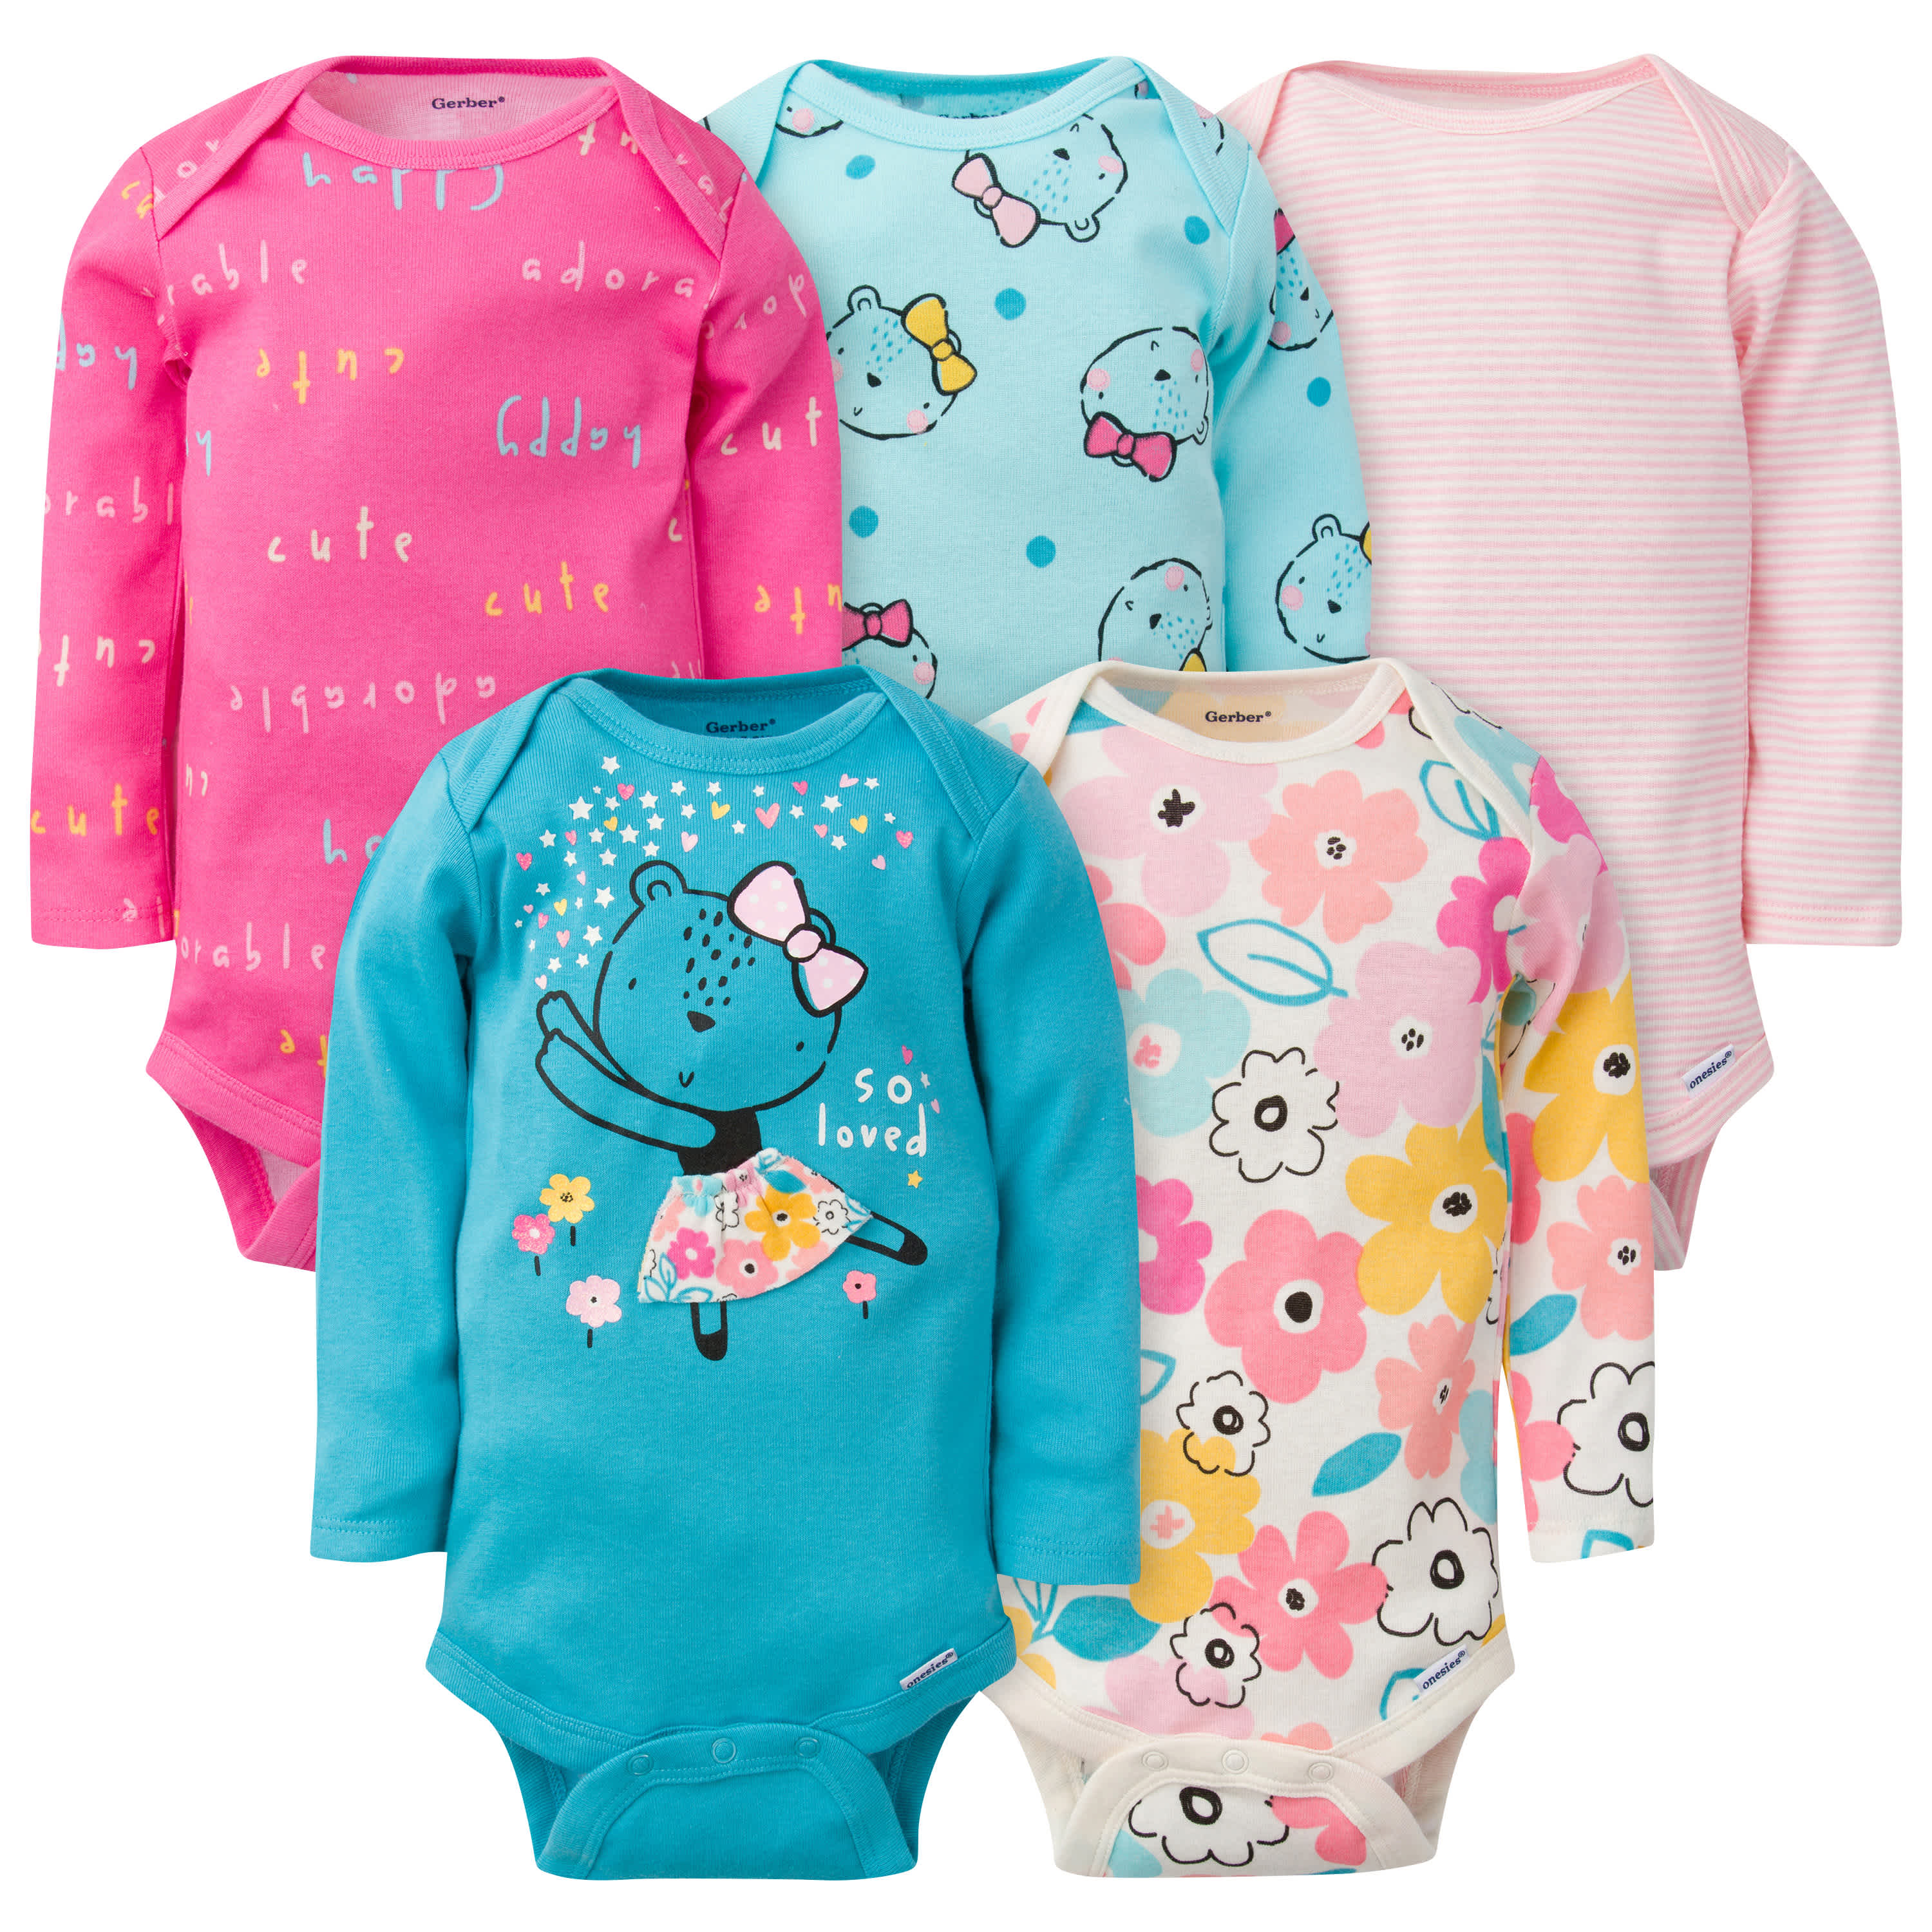 Baby Clothes Clearance Doorbuster Deals